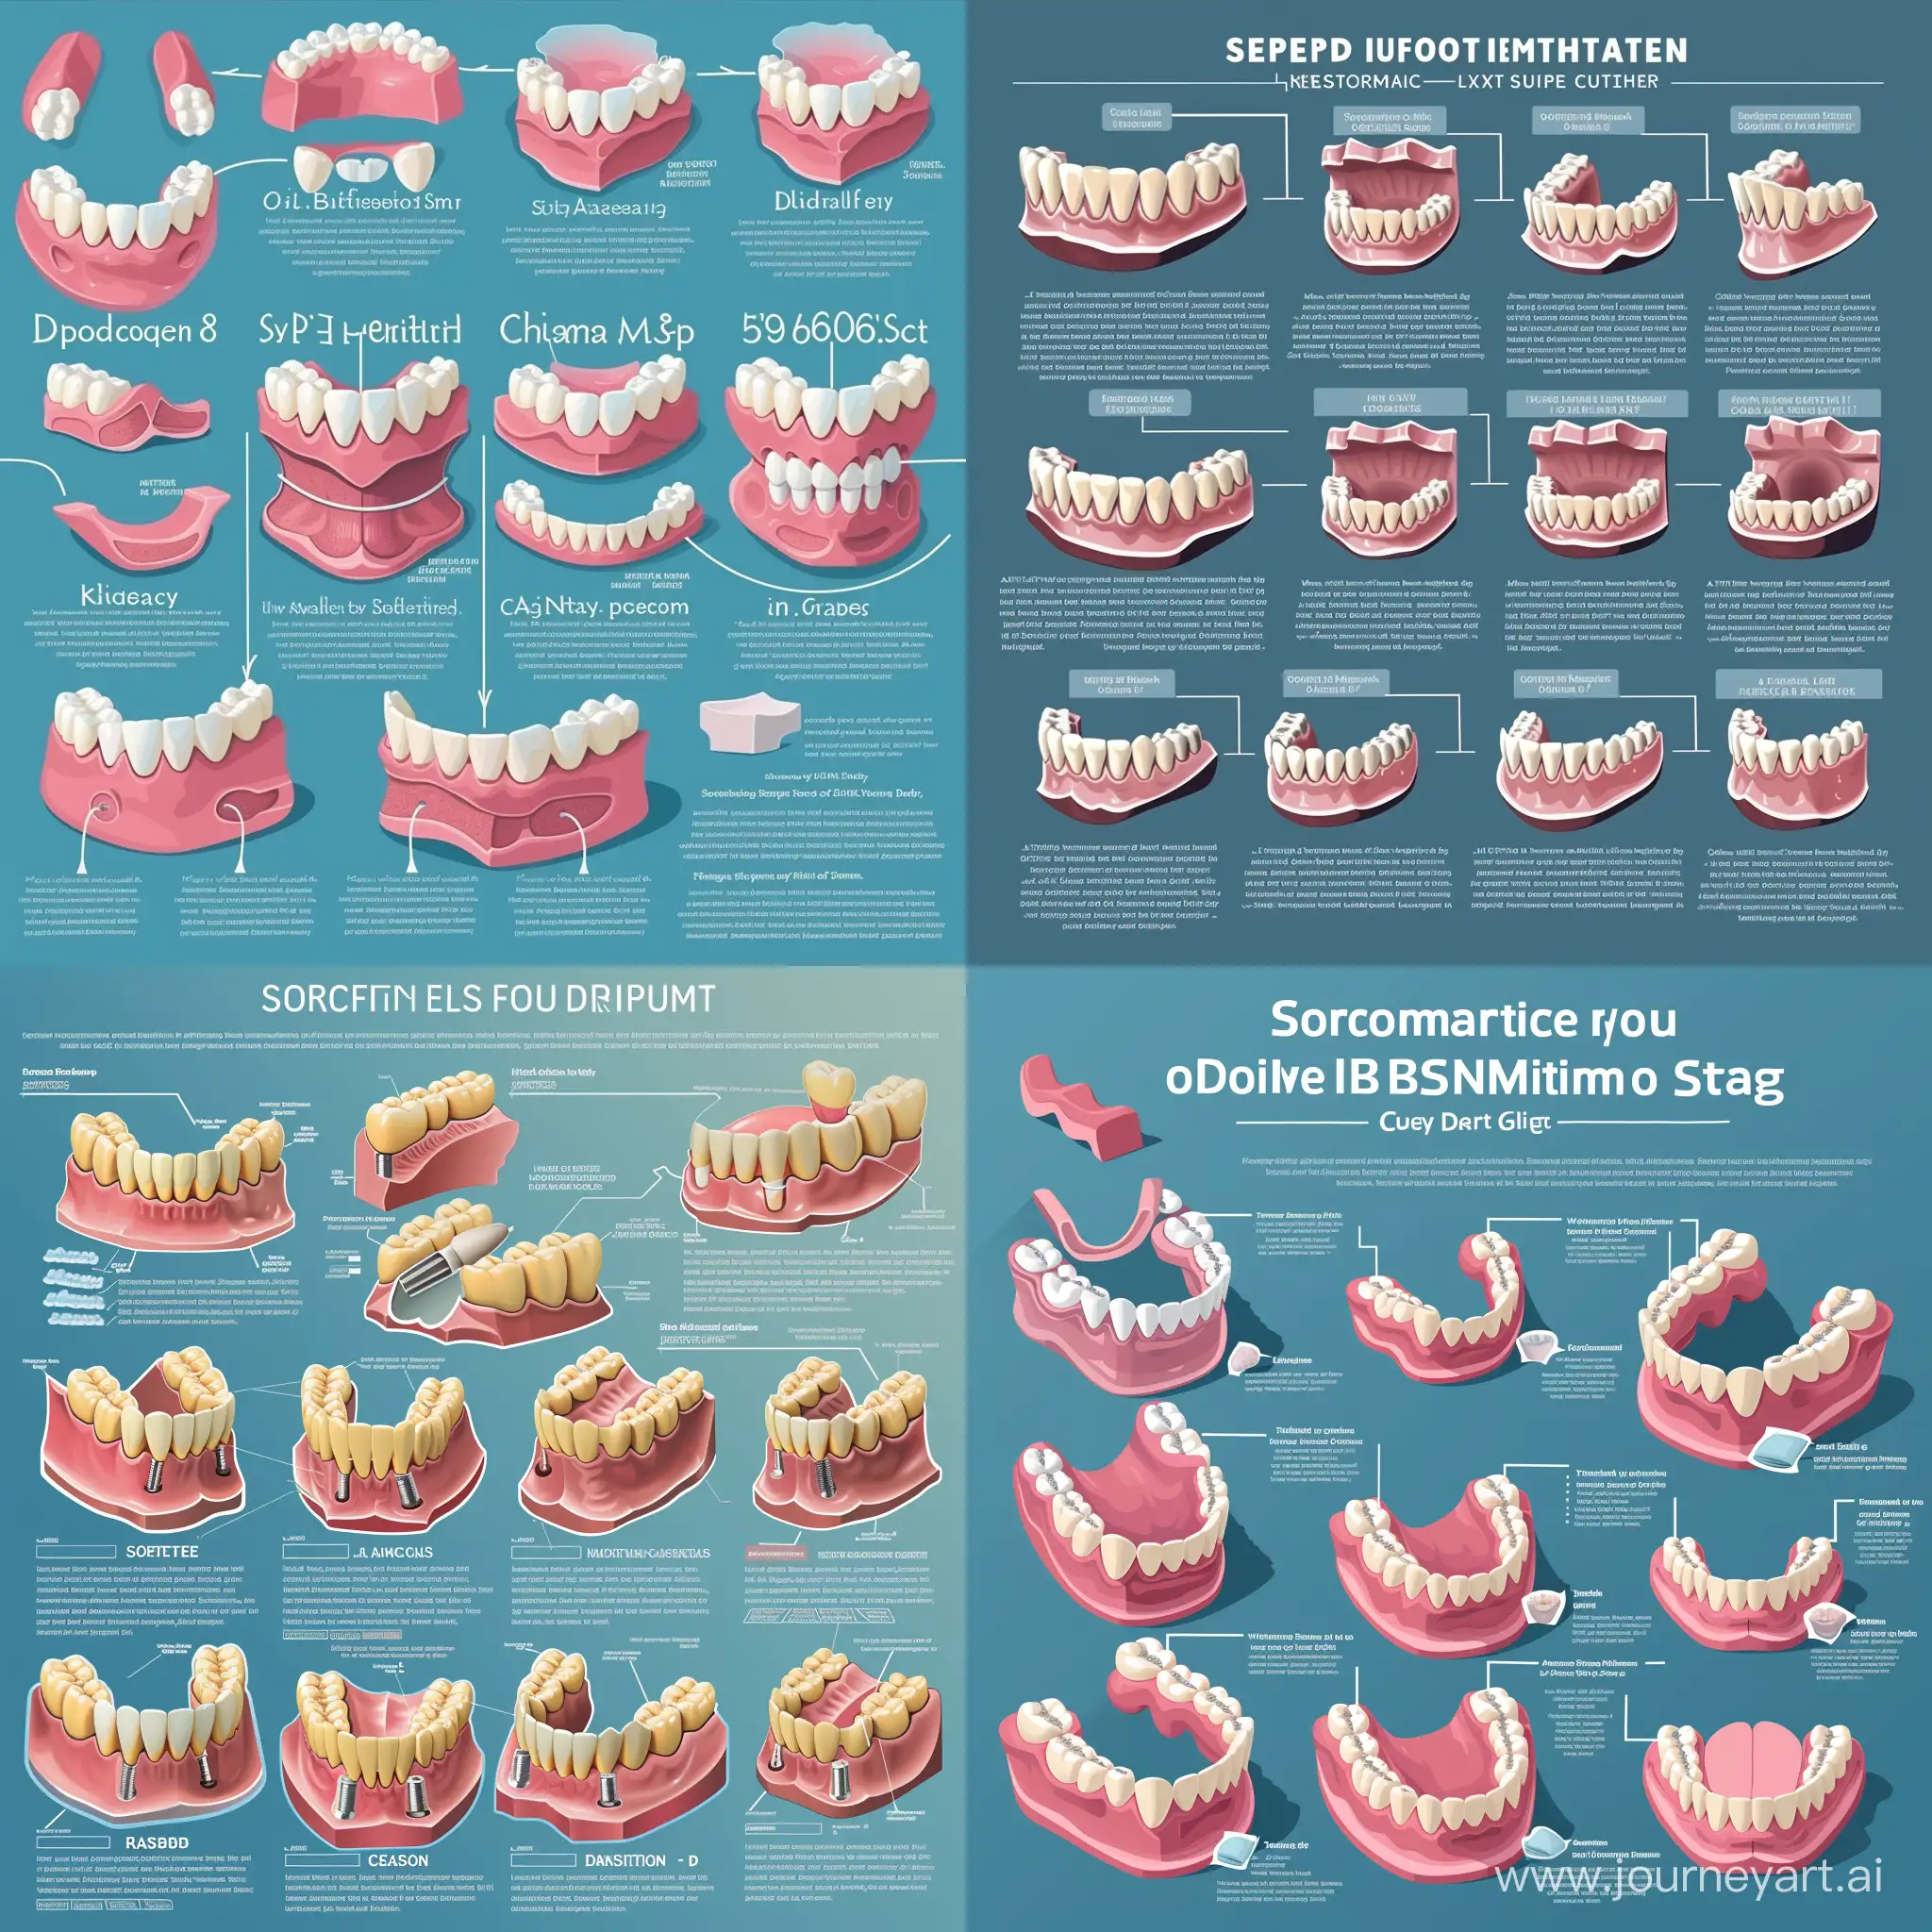 Create a poster showing steps of secondary impression for complete denture along with written steps